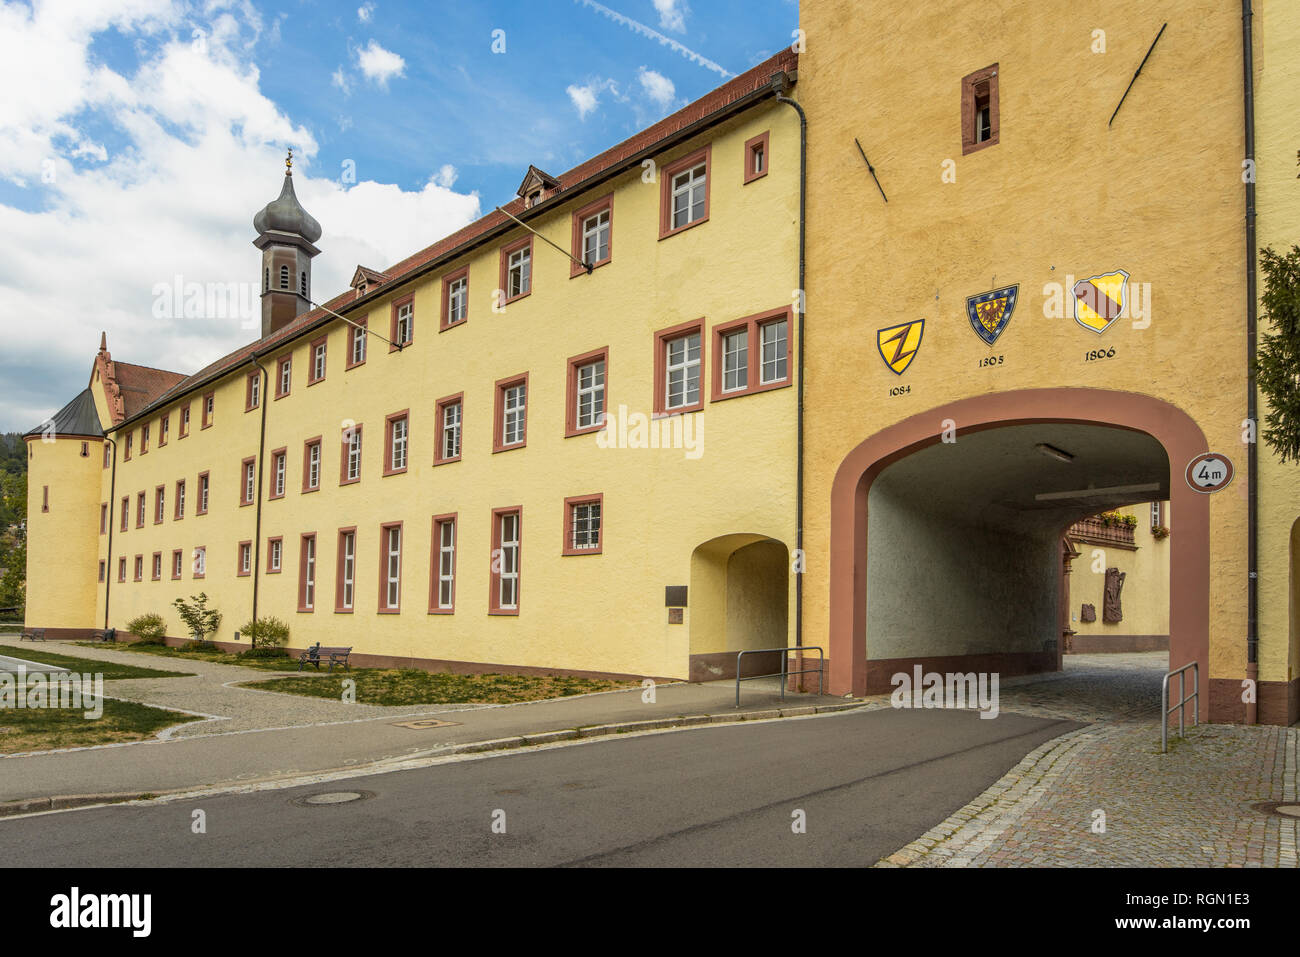 castle in the village Wolfach, Black Forest, Germany, castle with town gate Stock Photo